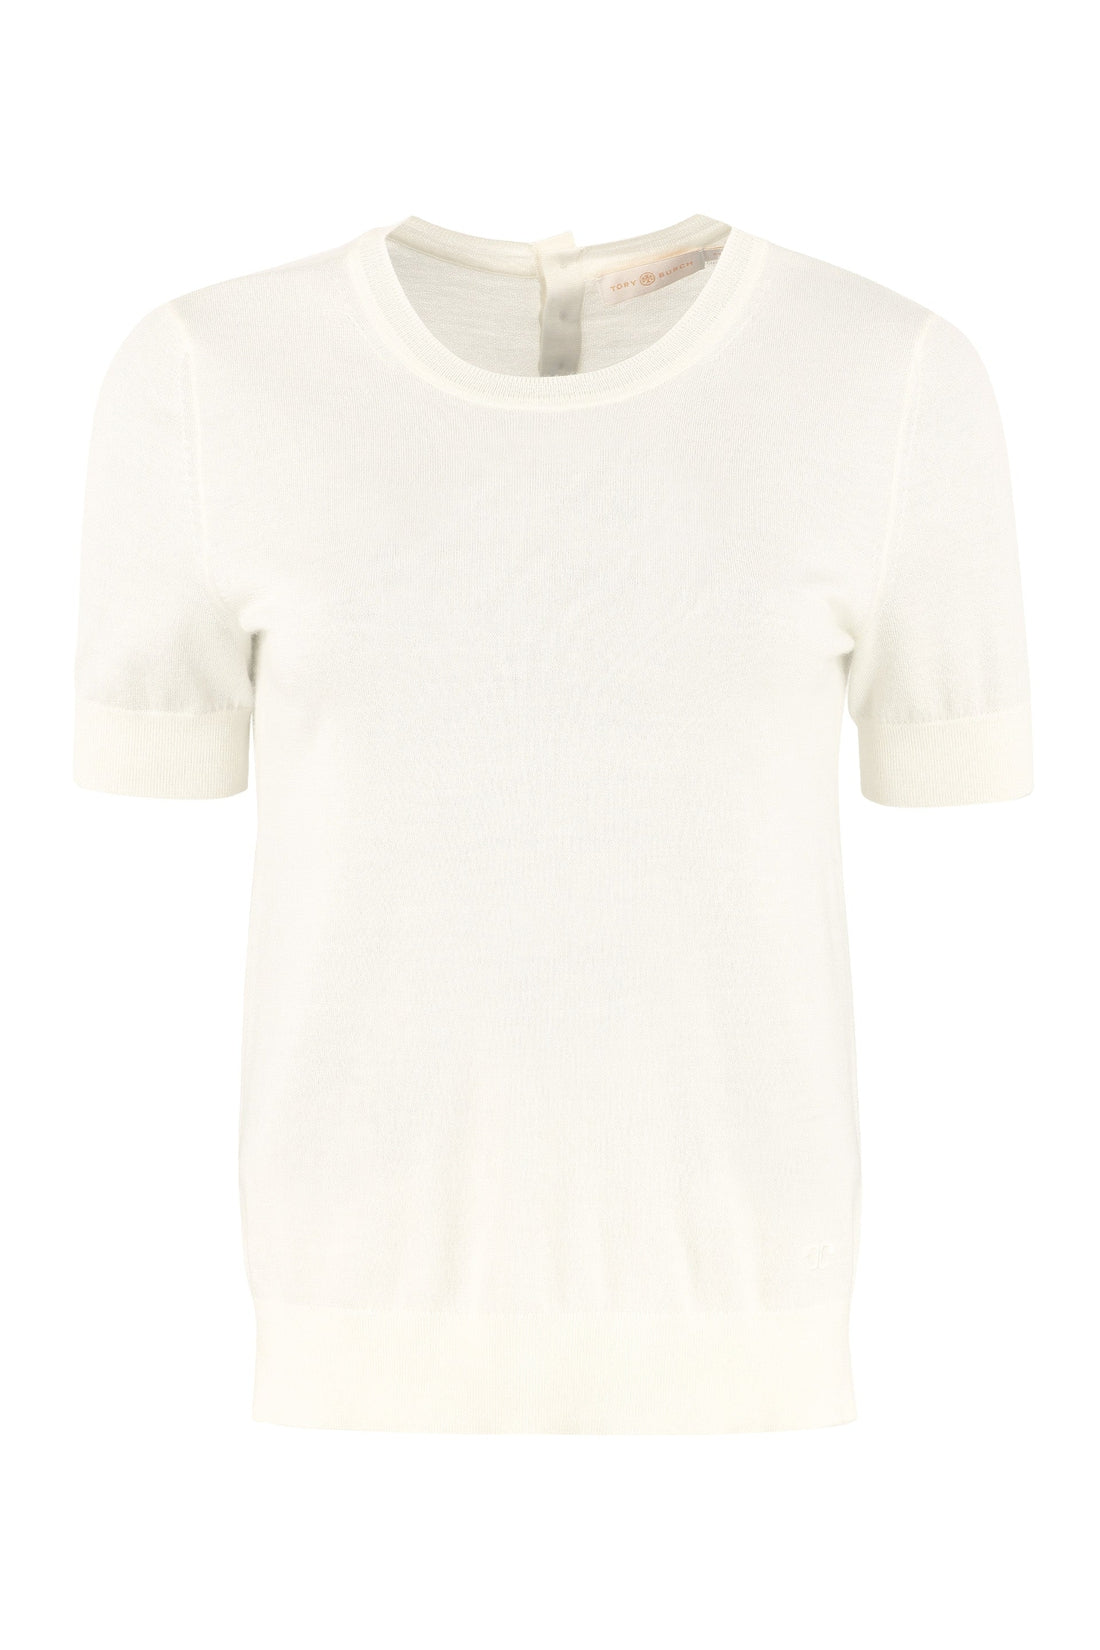 Tory Burch-OUTLET-SALE-Iberia short sleeve sweater-ARCHIVIST